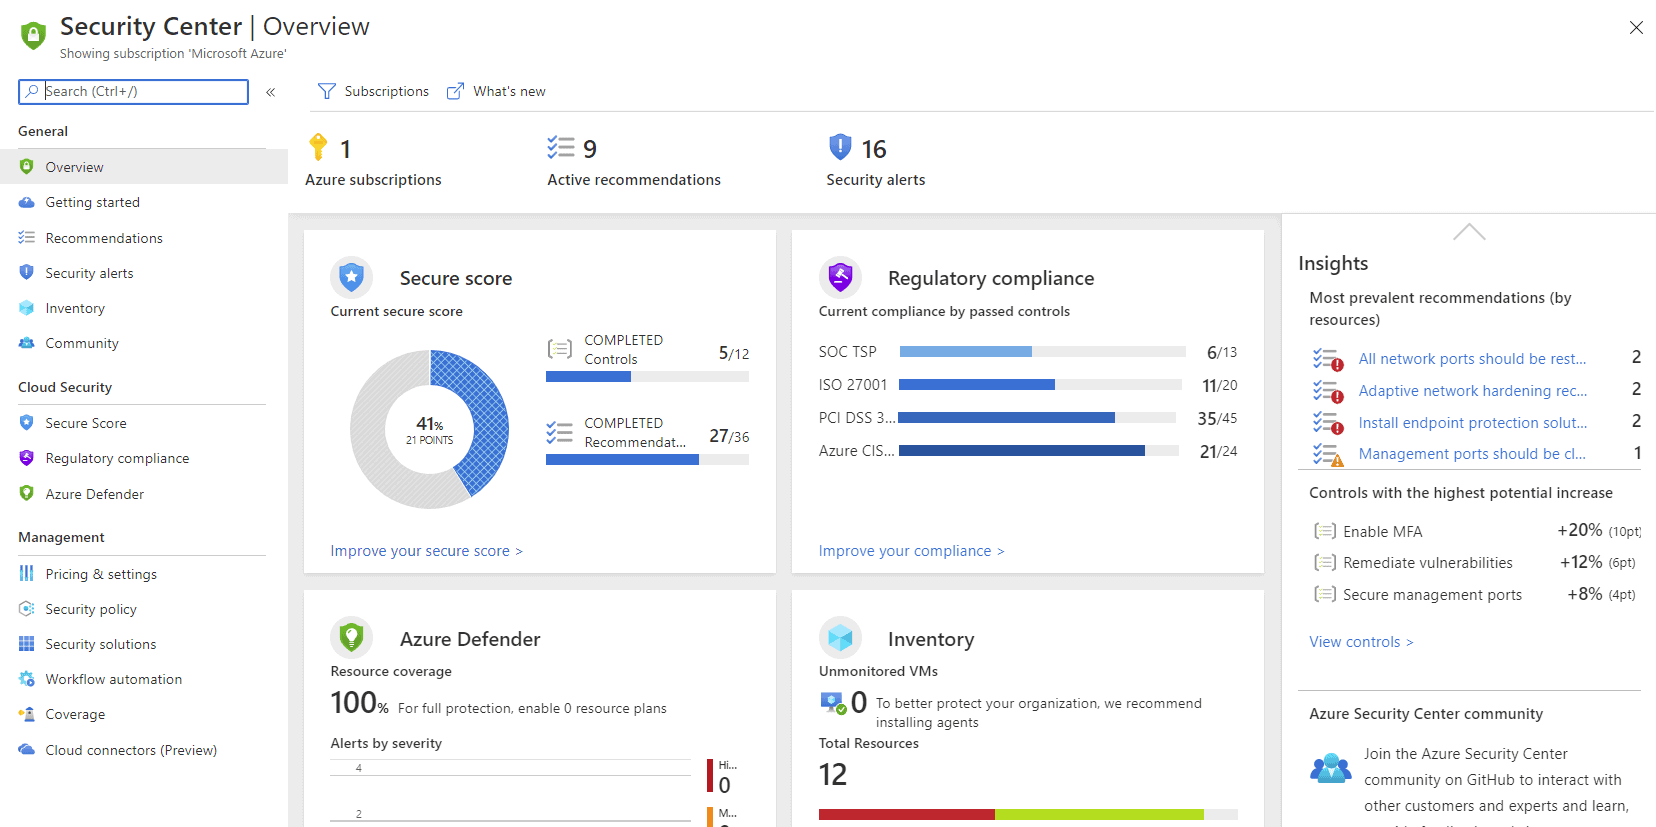 Azure Security Center Overview blade